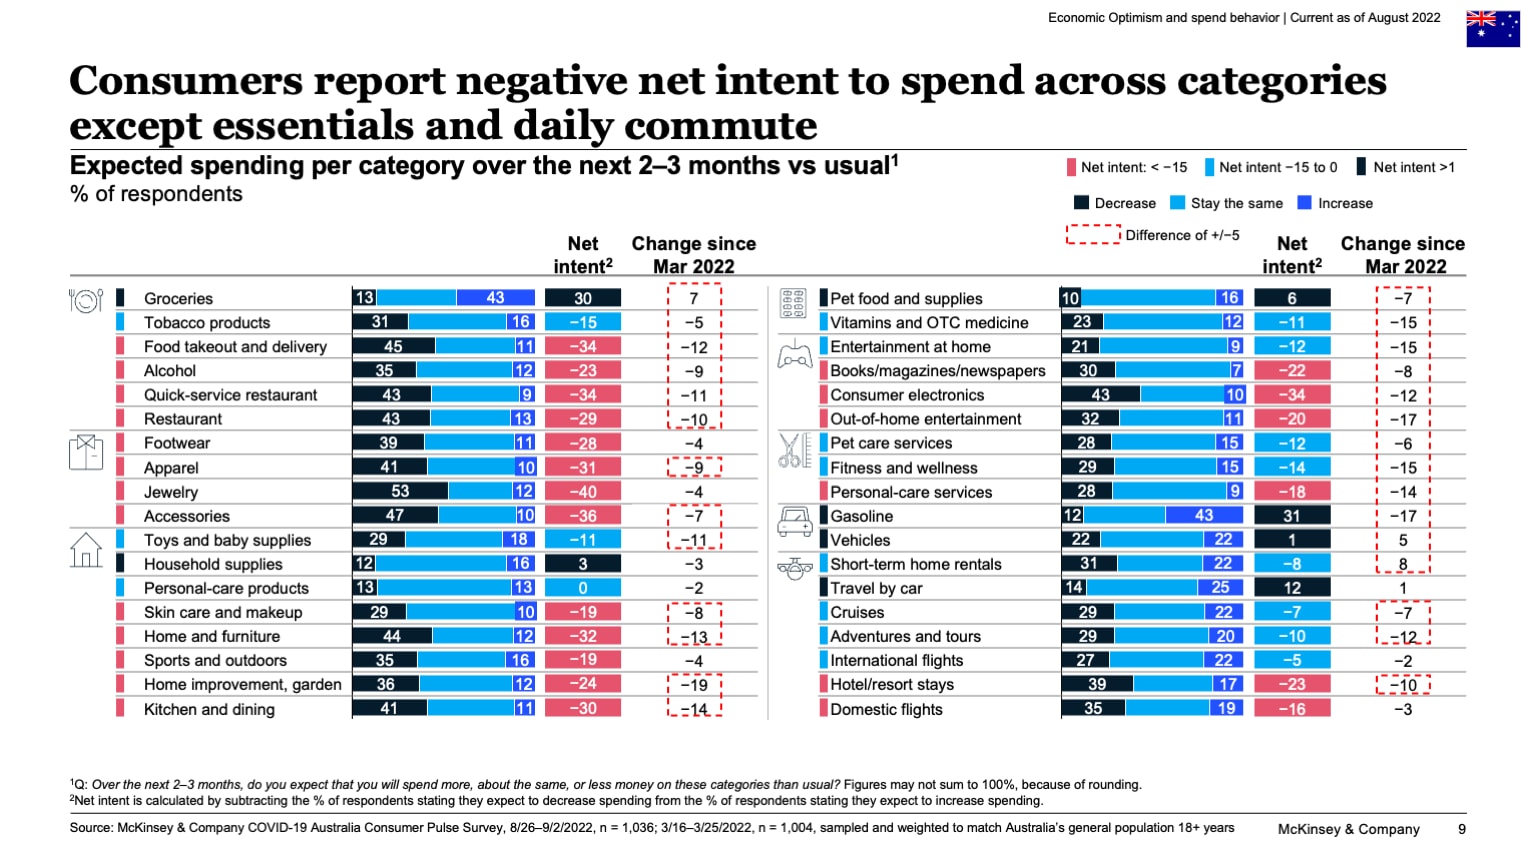 Consumers report negative net intent to spend across categories except essentials and daily commute